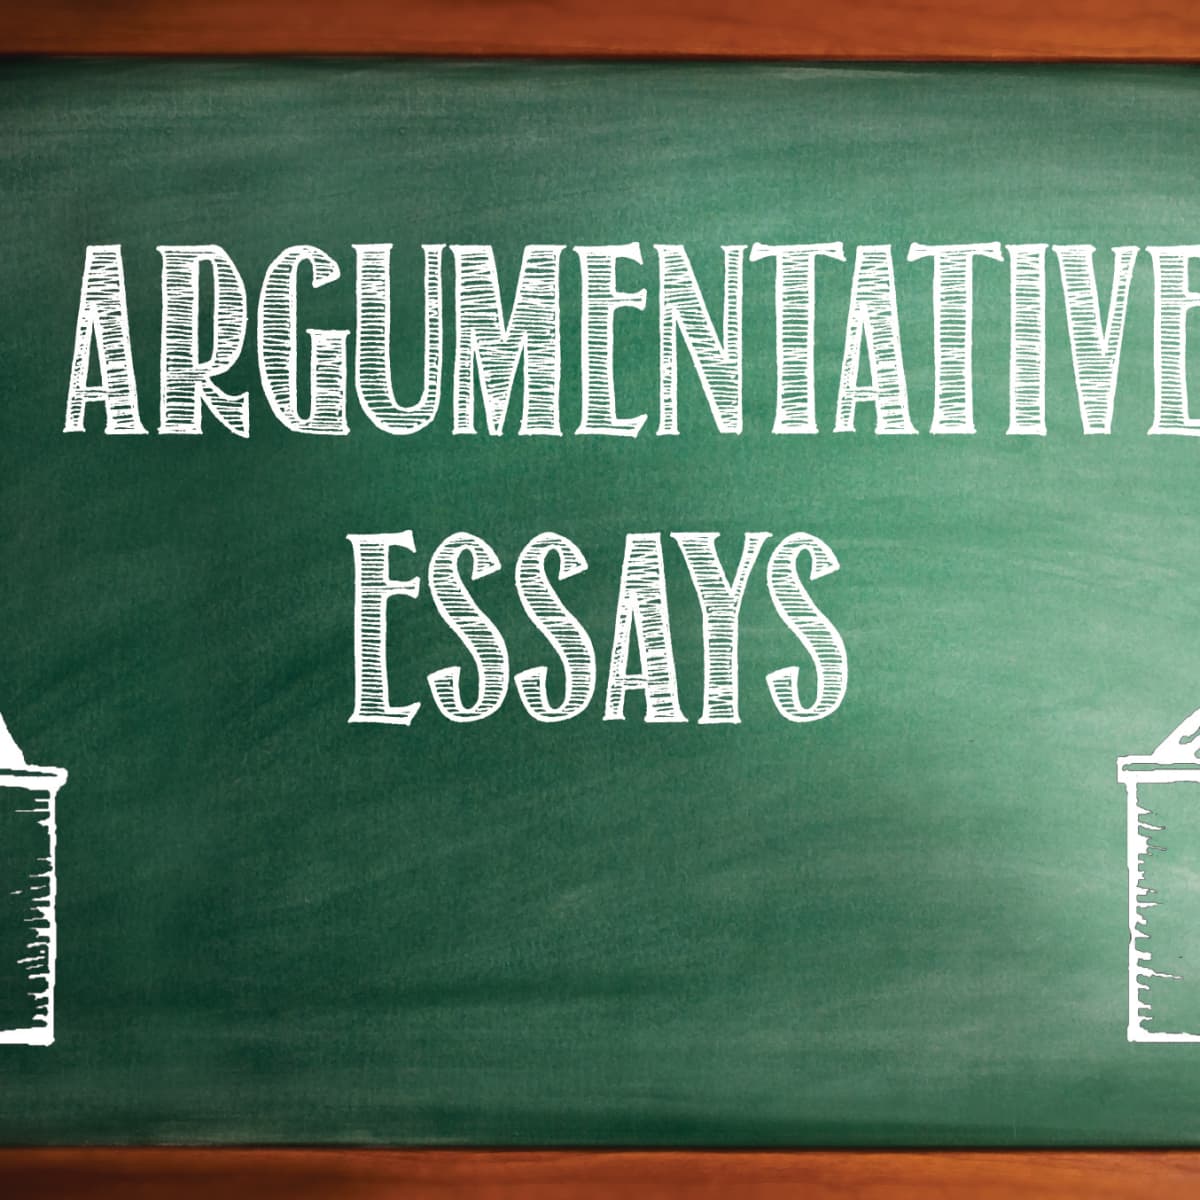 What is a Good Topic For an Argumentative Essay?